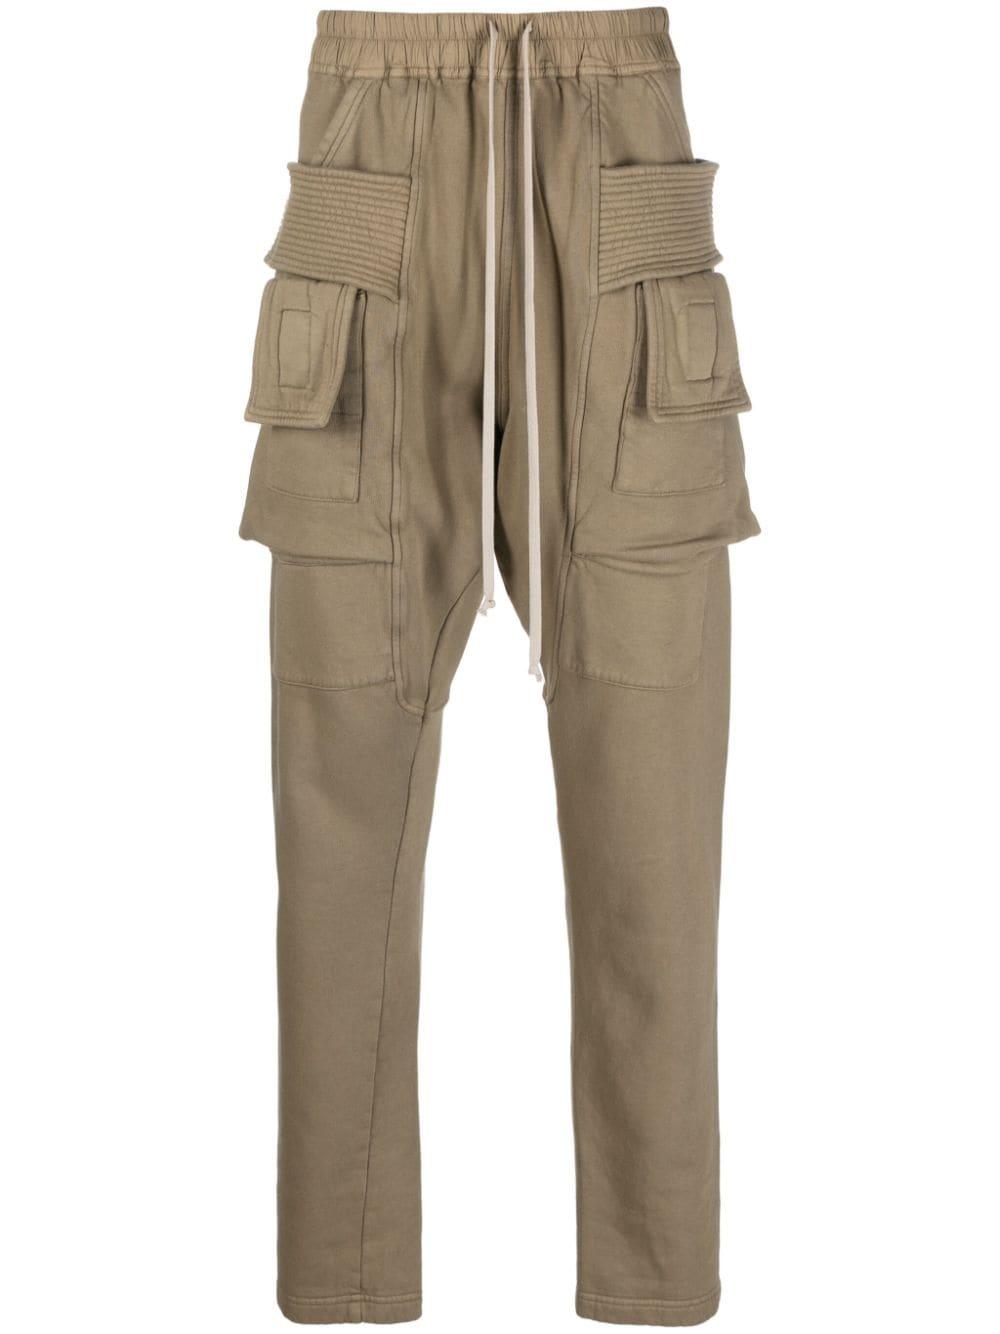 Rick Owens DRKSHDW Creatch Cotton Jersey Cargo Pants in Natural